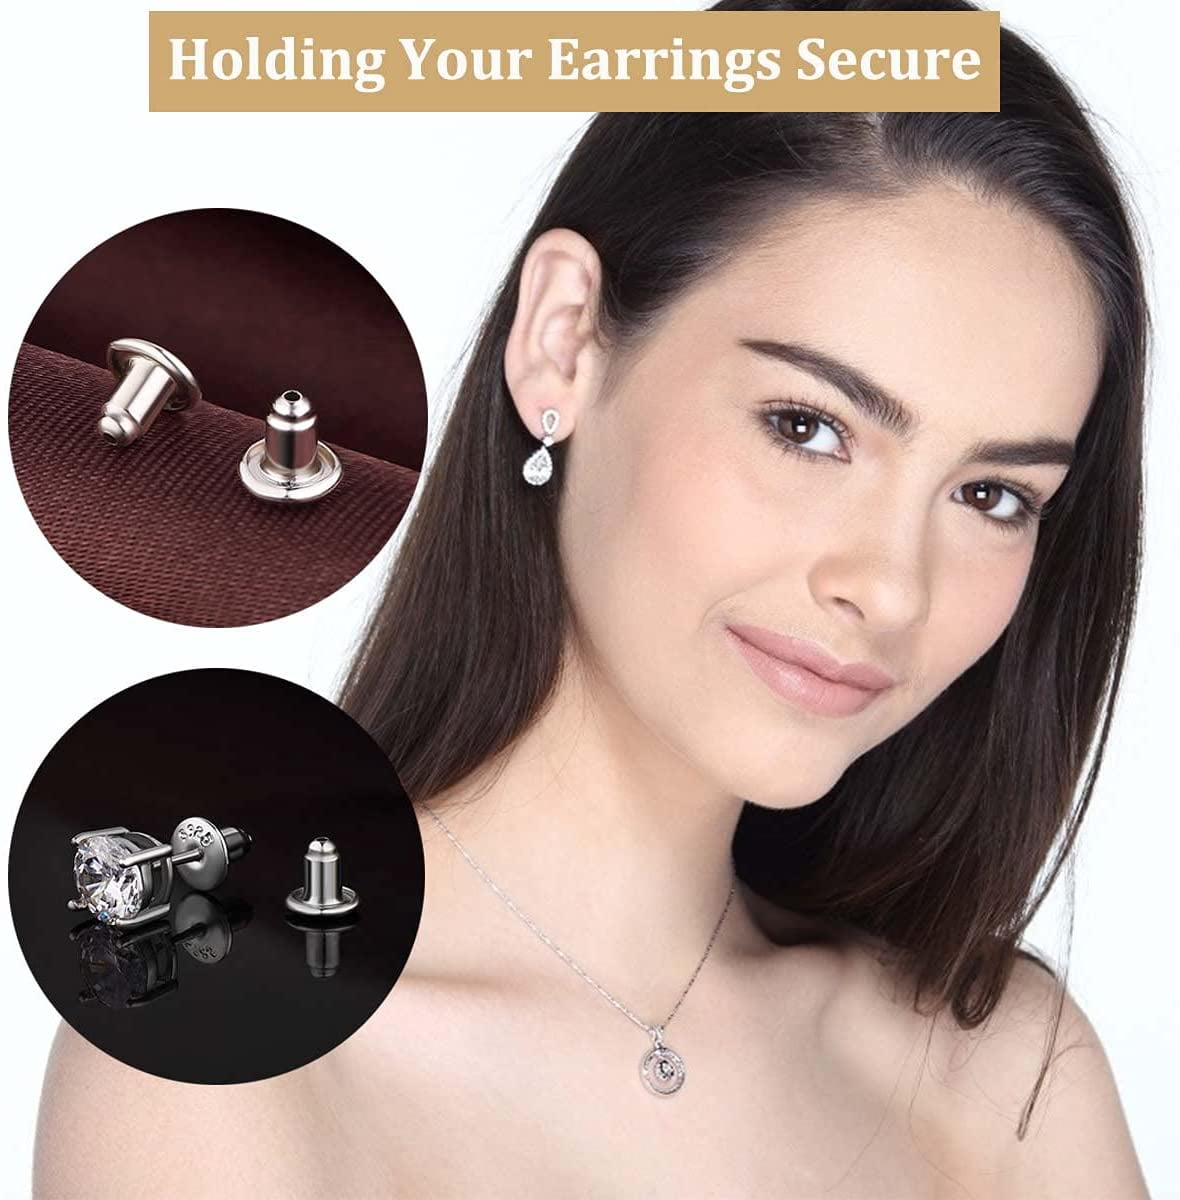 Earring Backs for Droopy Ears, Hypoallergenic 925 Silver Earring Backs  Replacements for Heavy Earring Support Backs for Diamond Studs (2 Pairs)